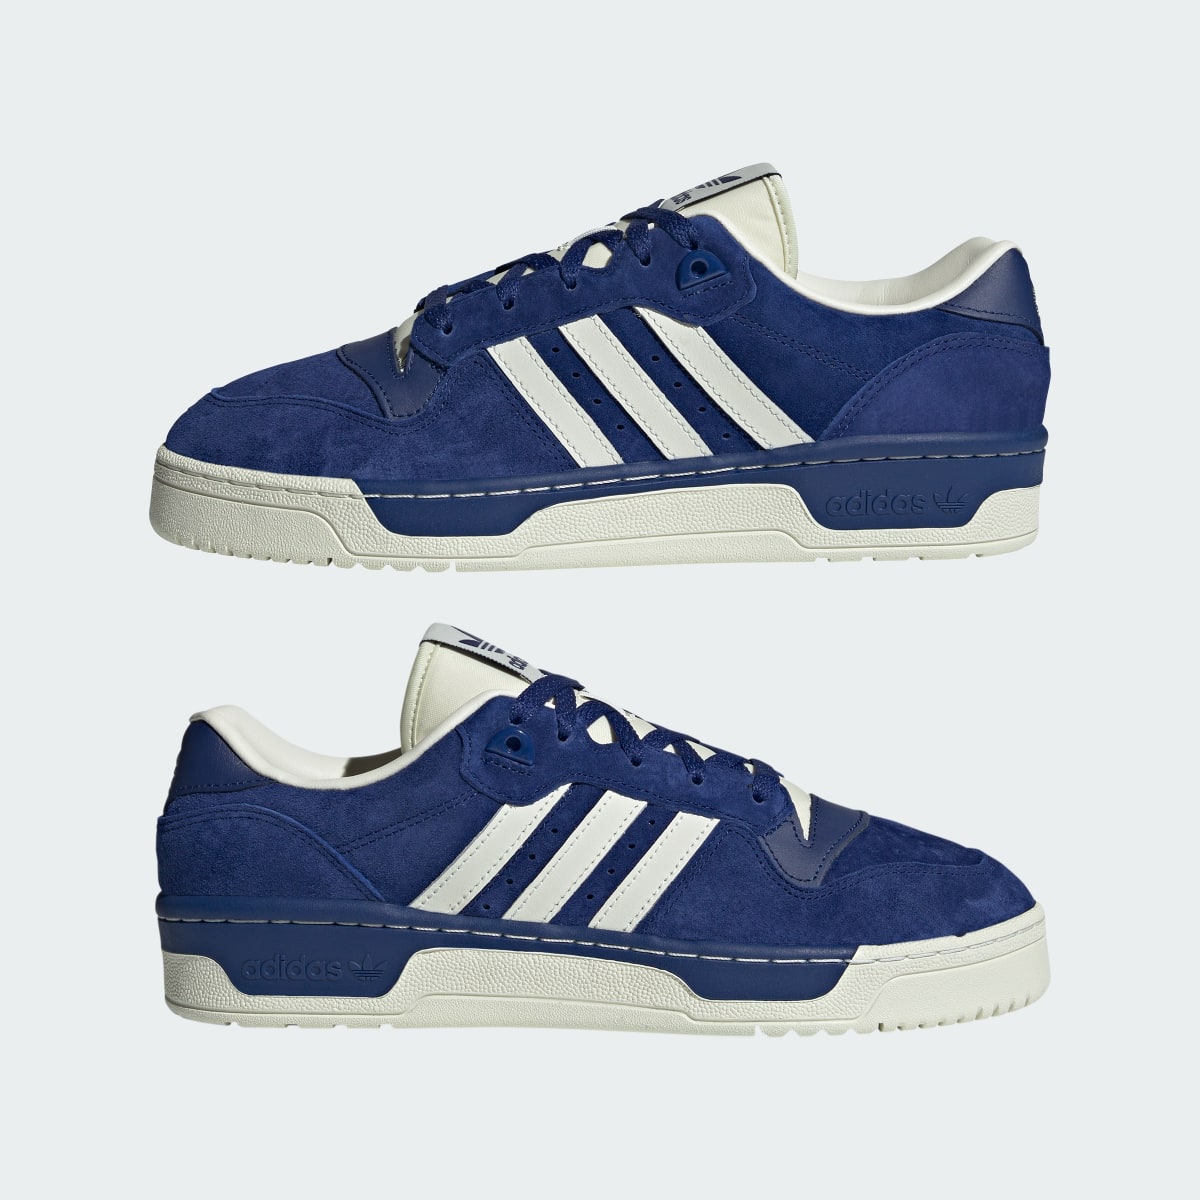 Adidas Rivalry Low Shoes. 9